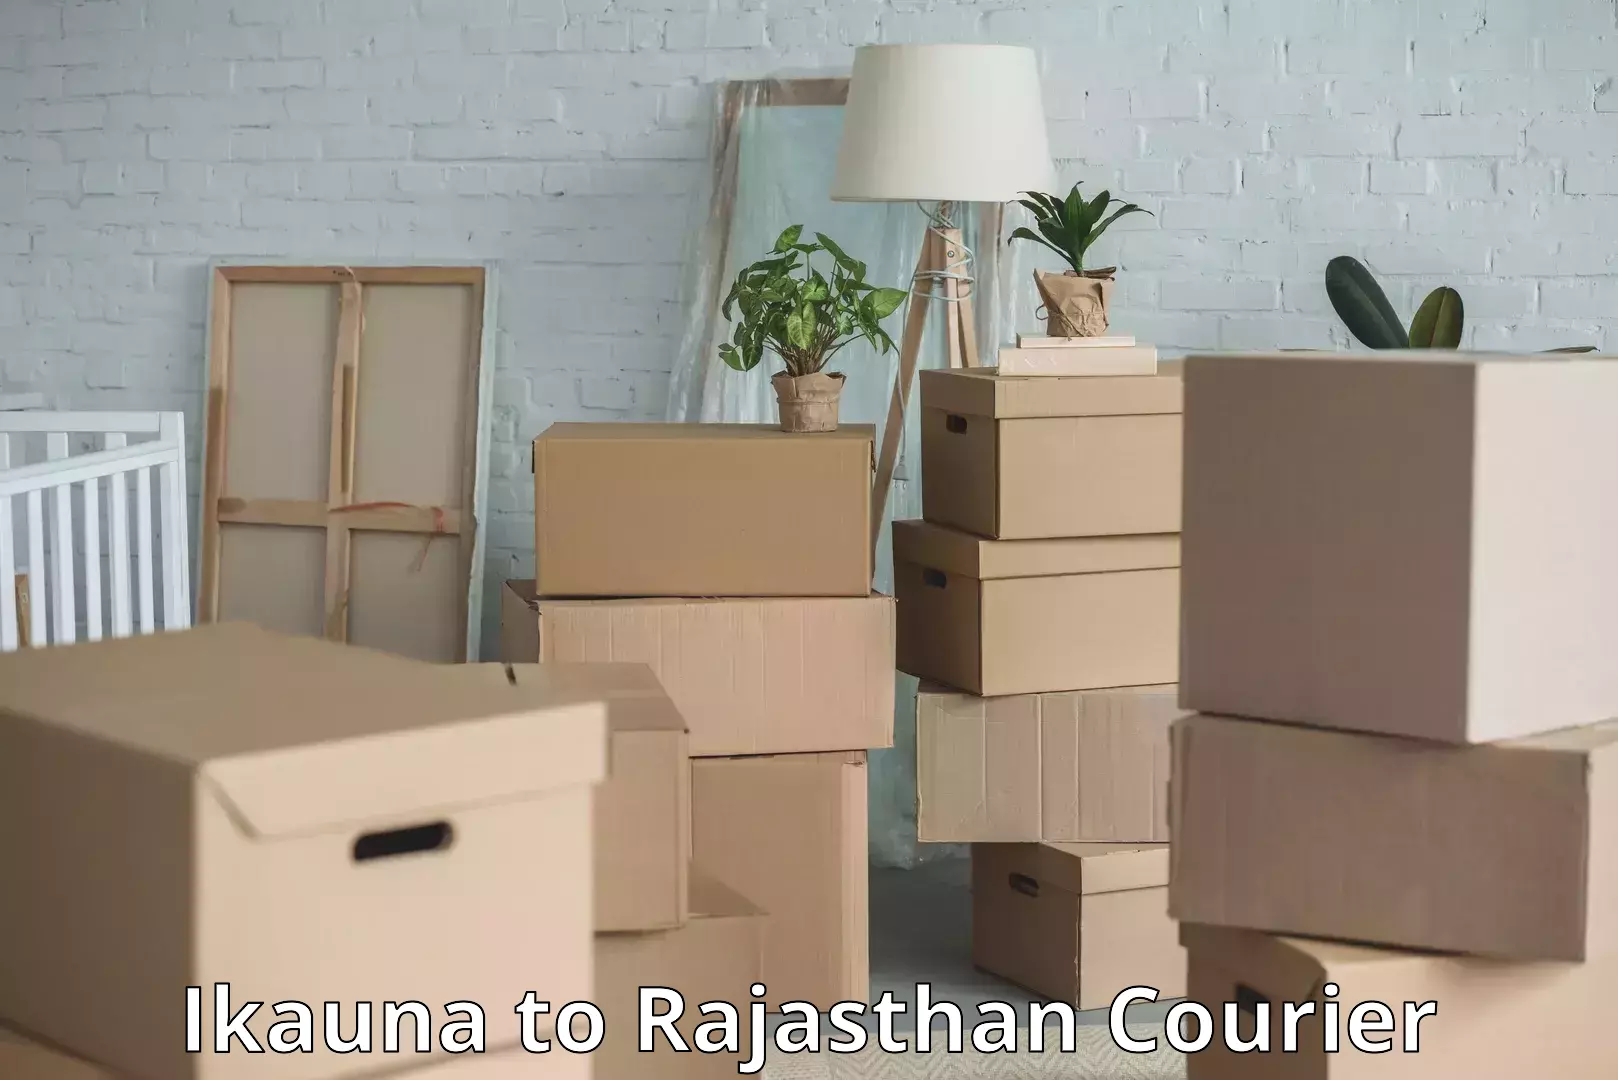 Luggage transport consulting Ikauna to Rajasthan